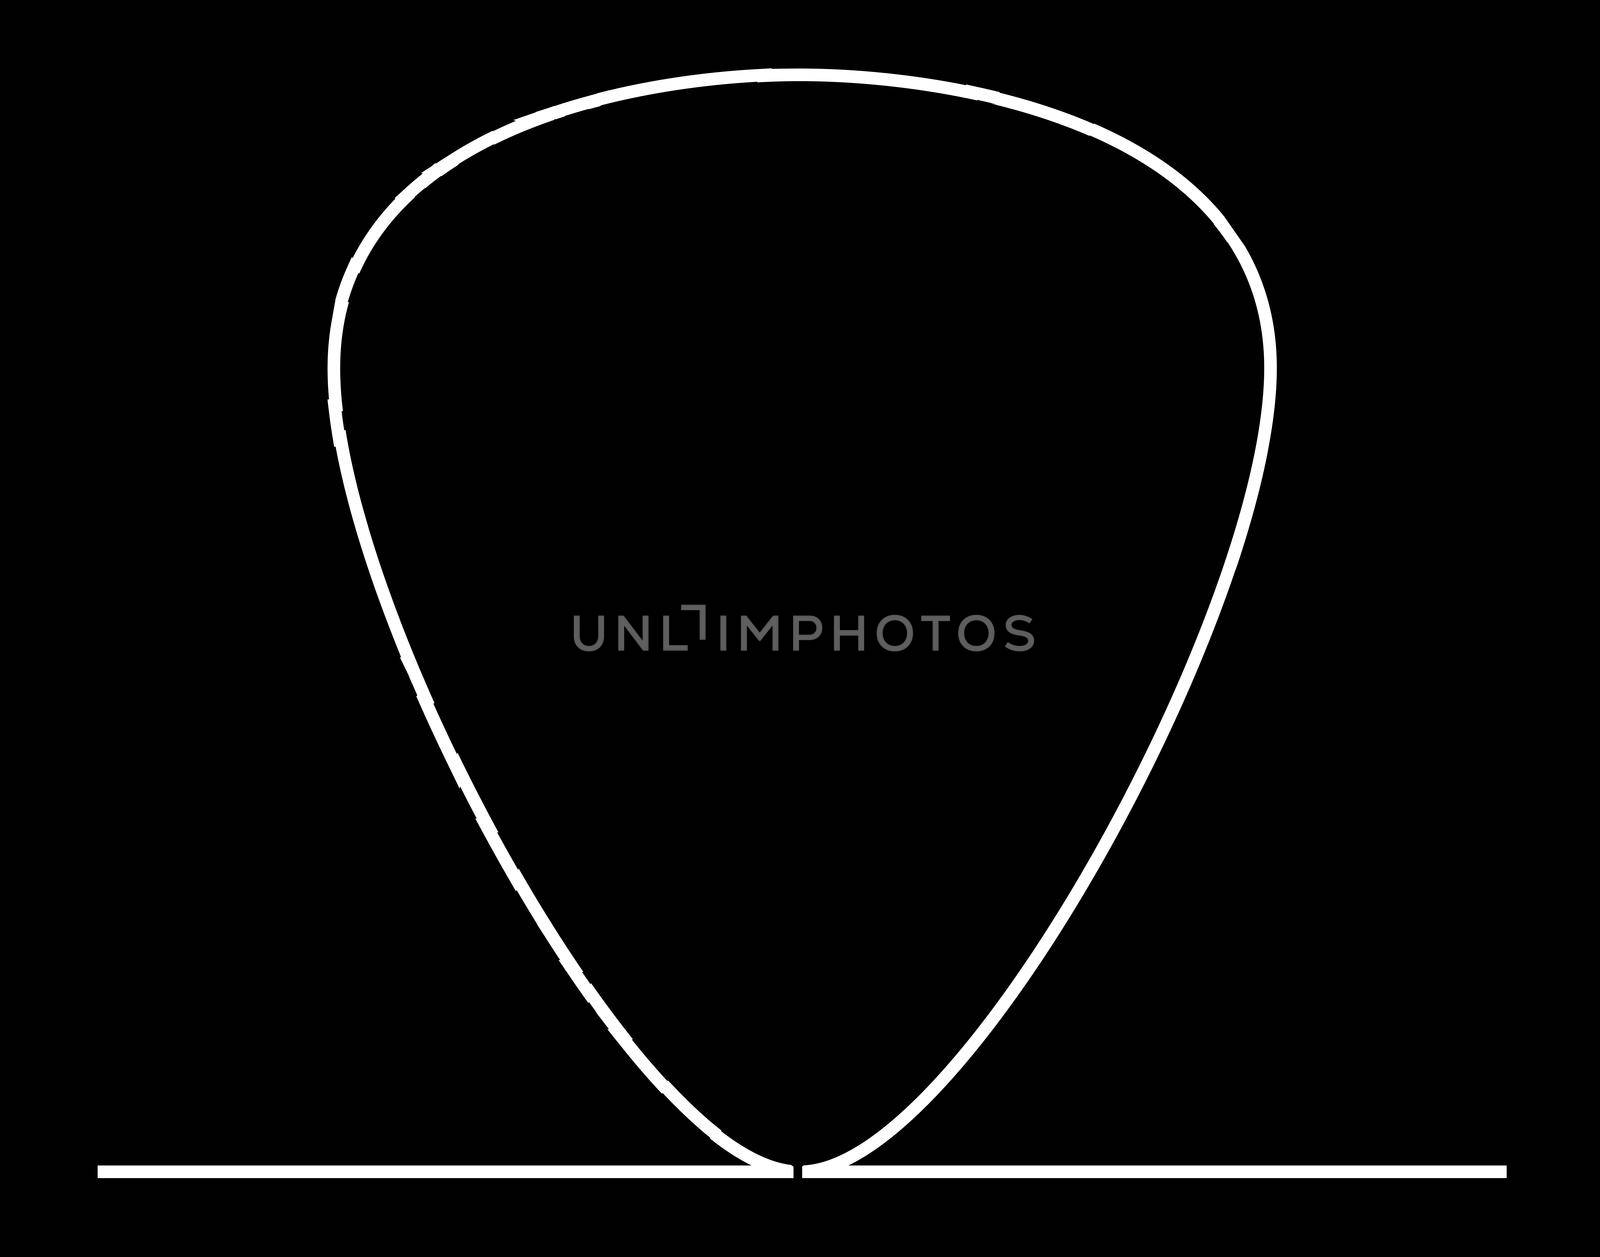 Typical guitar pic outline shape as a continuous white line against a black background